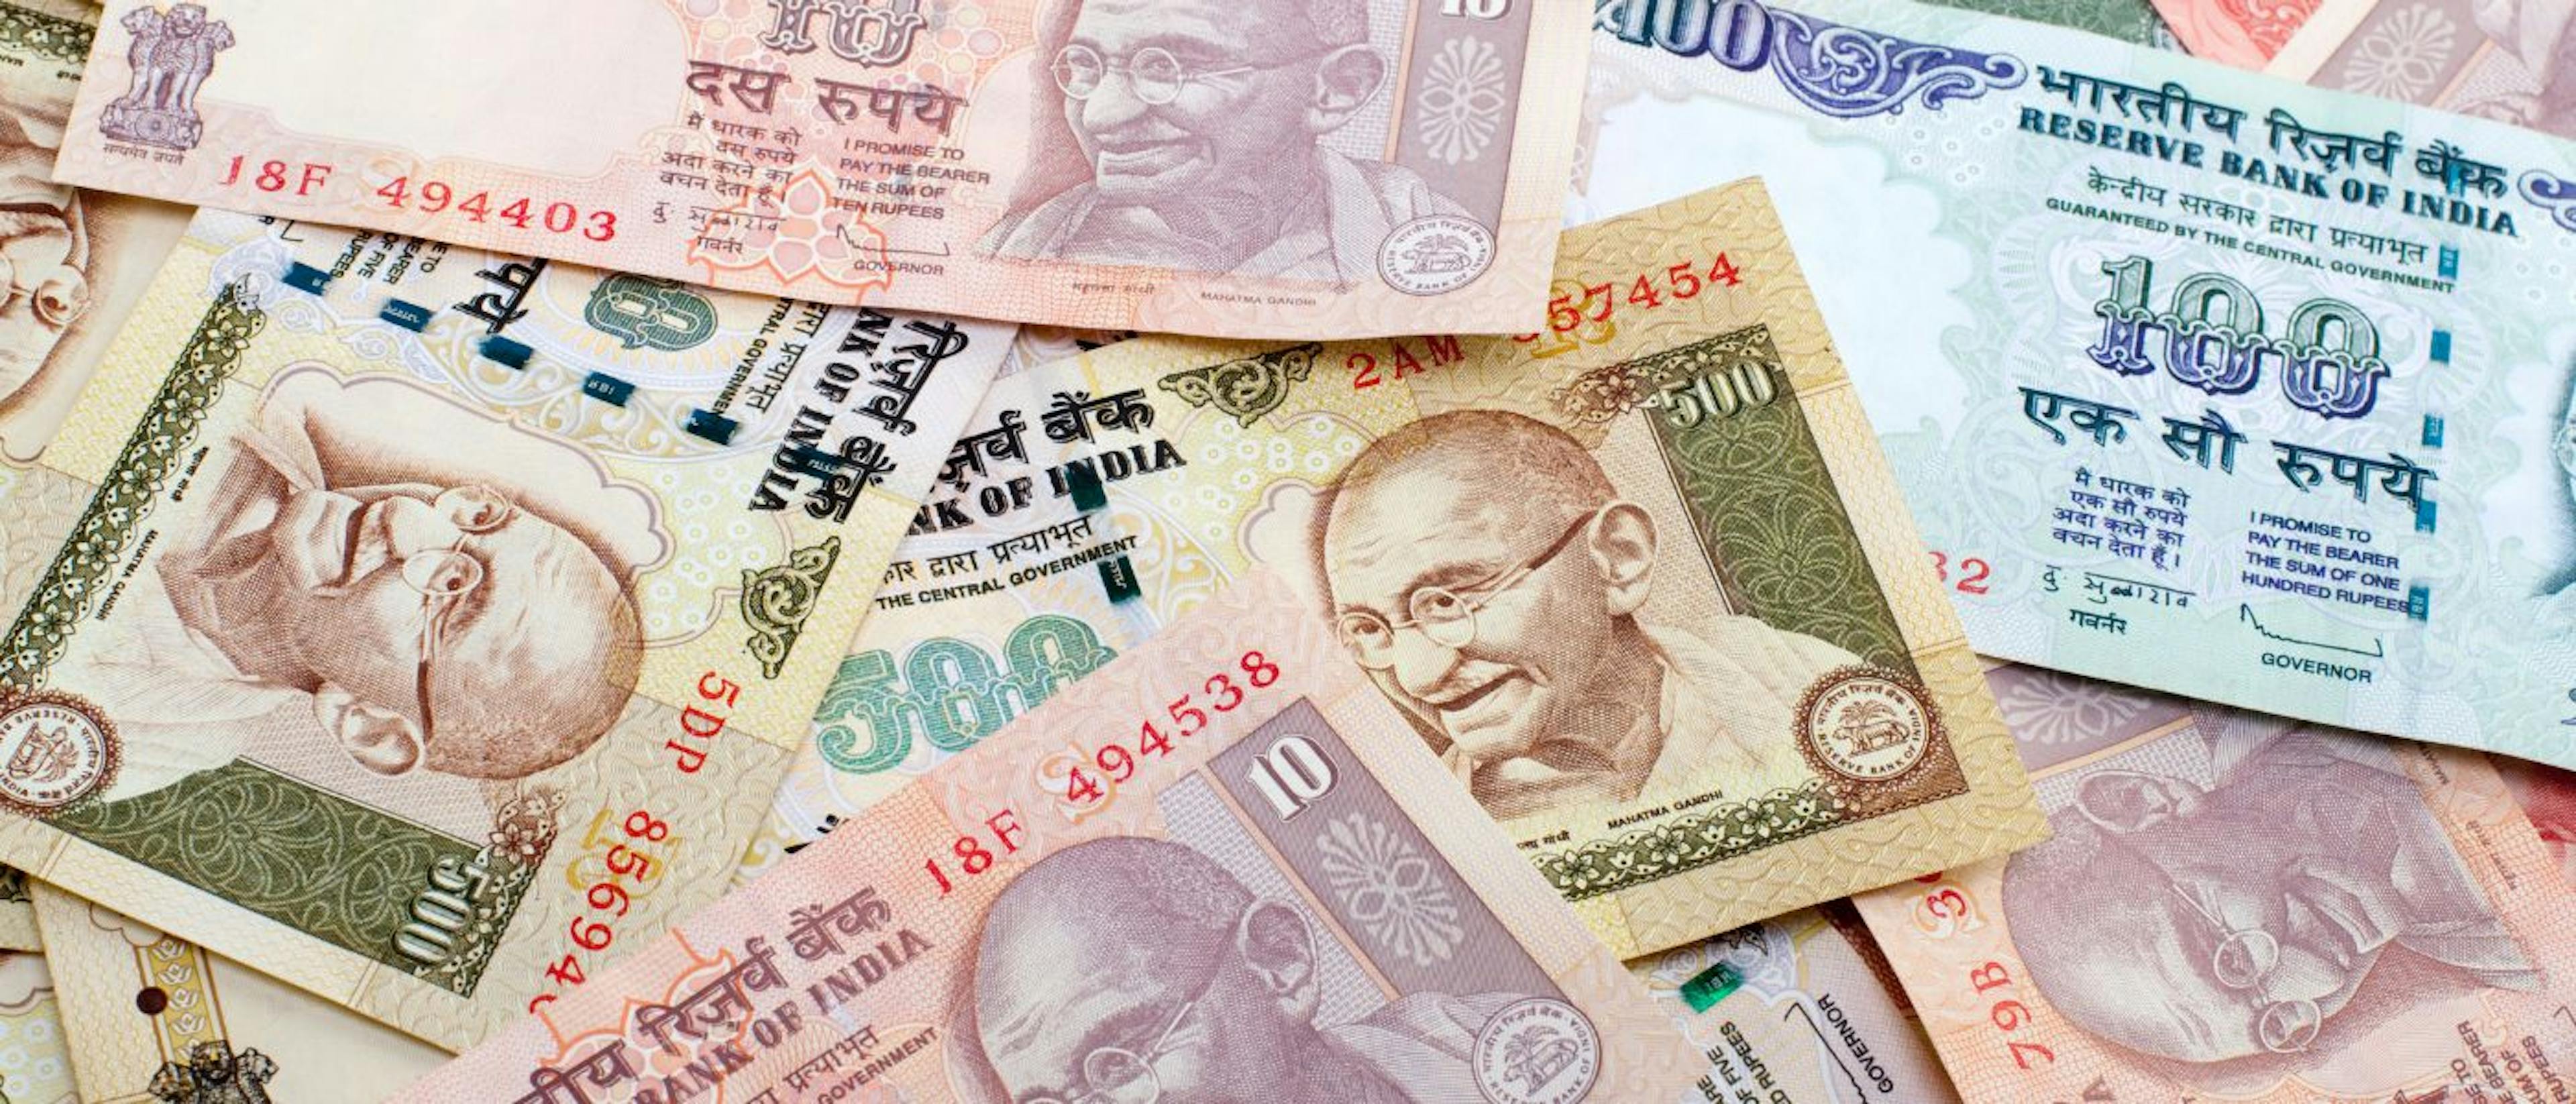 featured image - Indian Currency and Finance: Chapter VII - Indian Banking